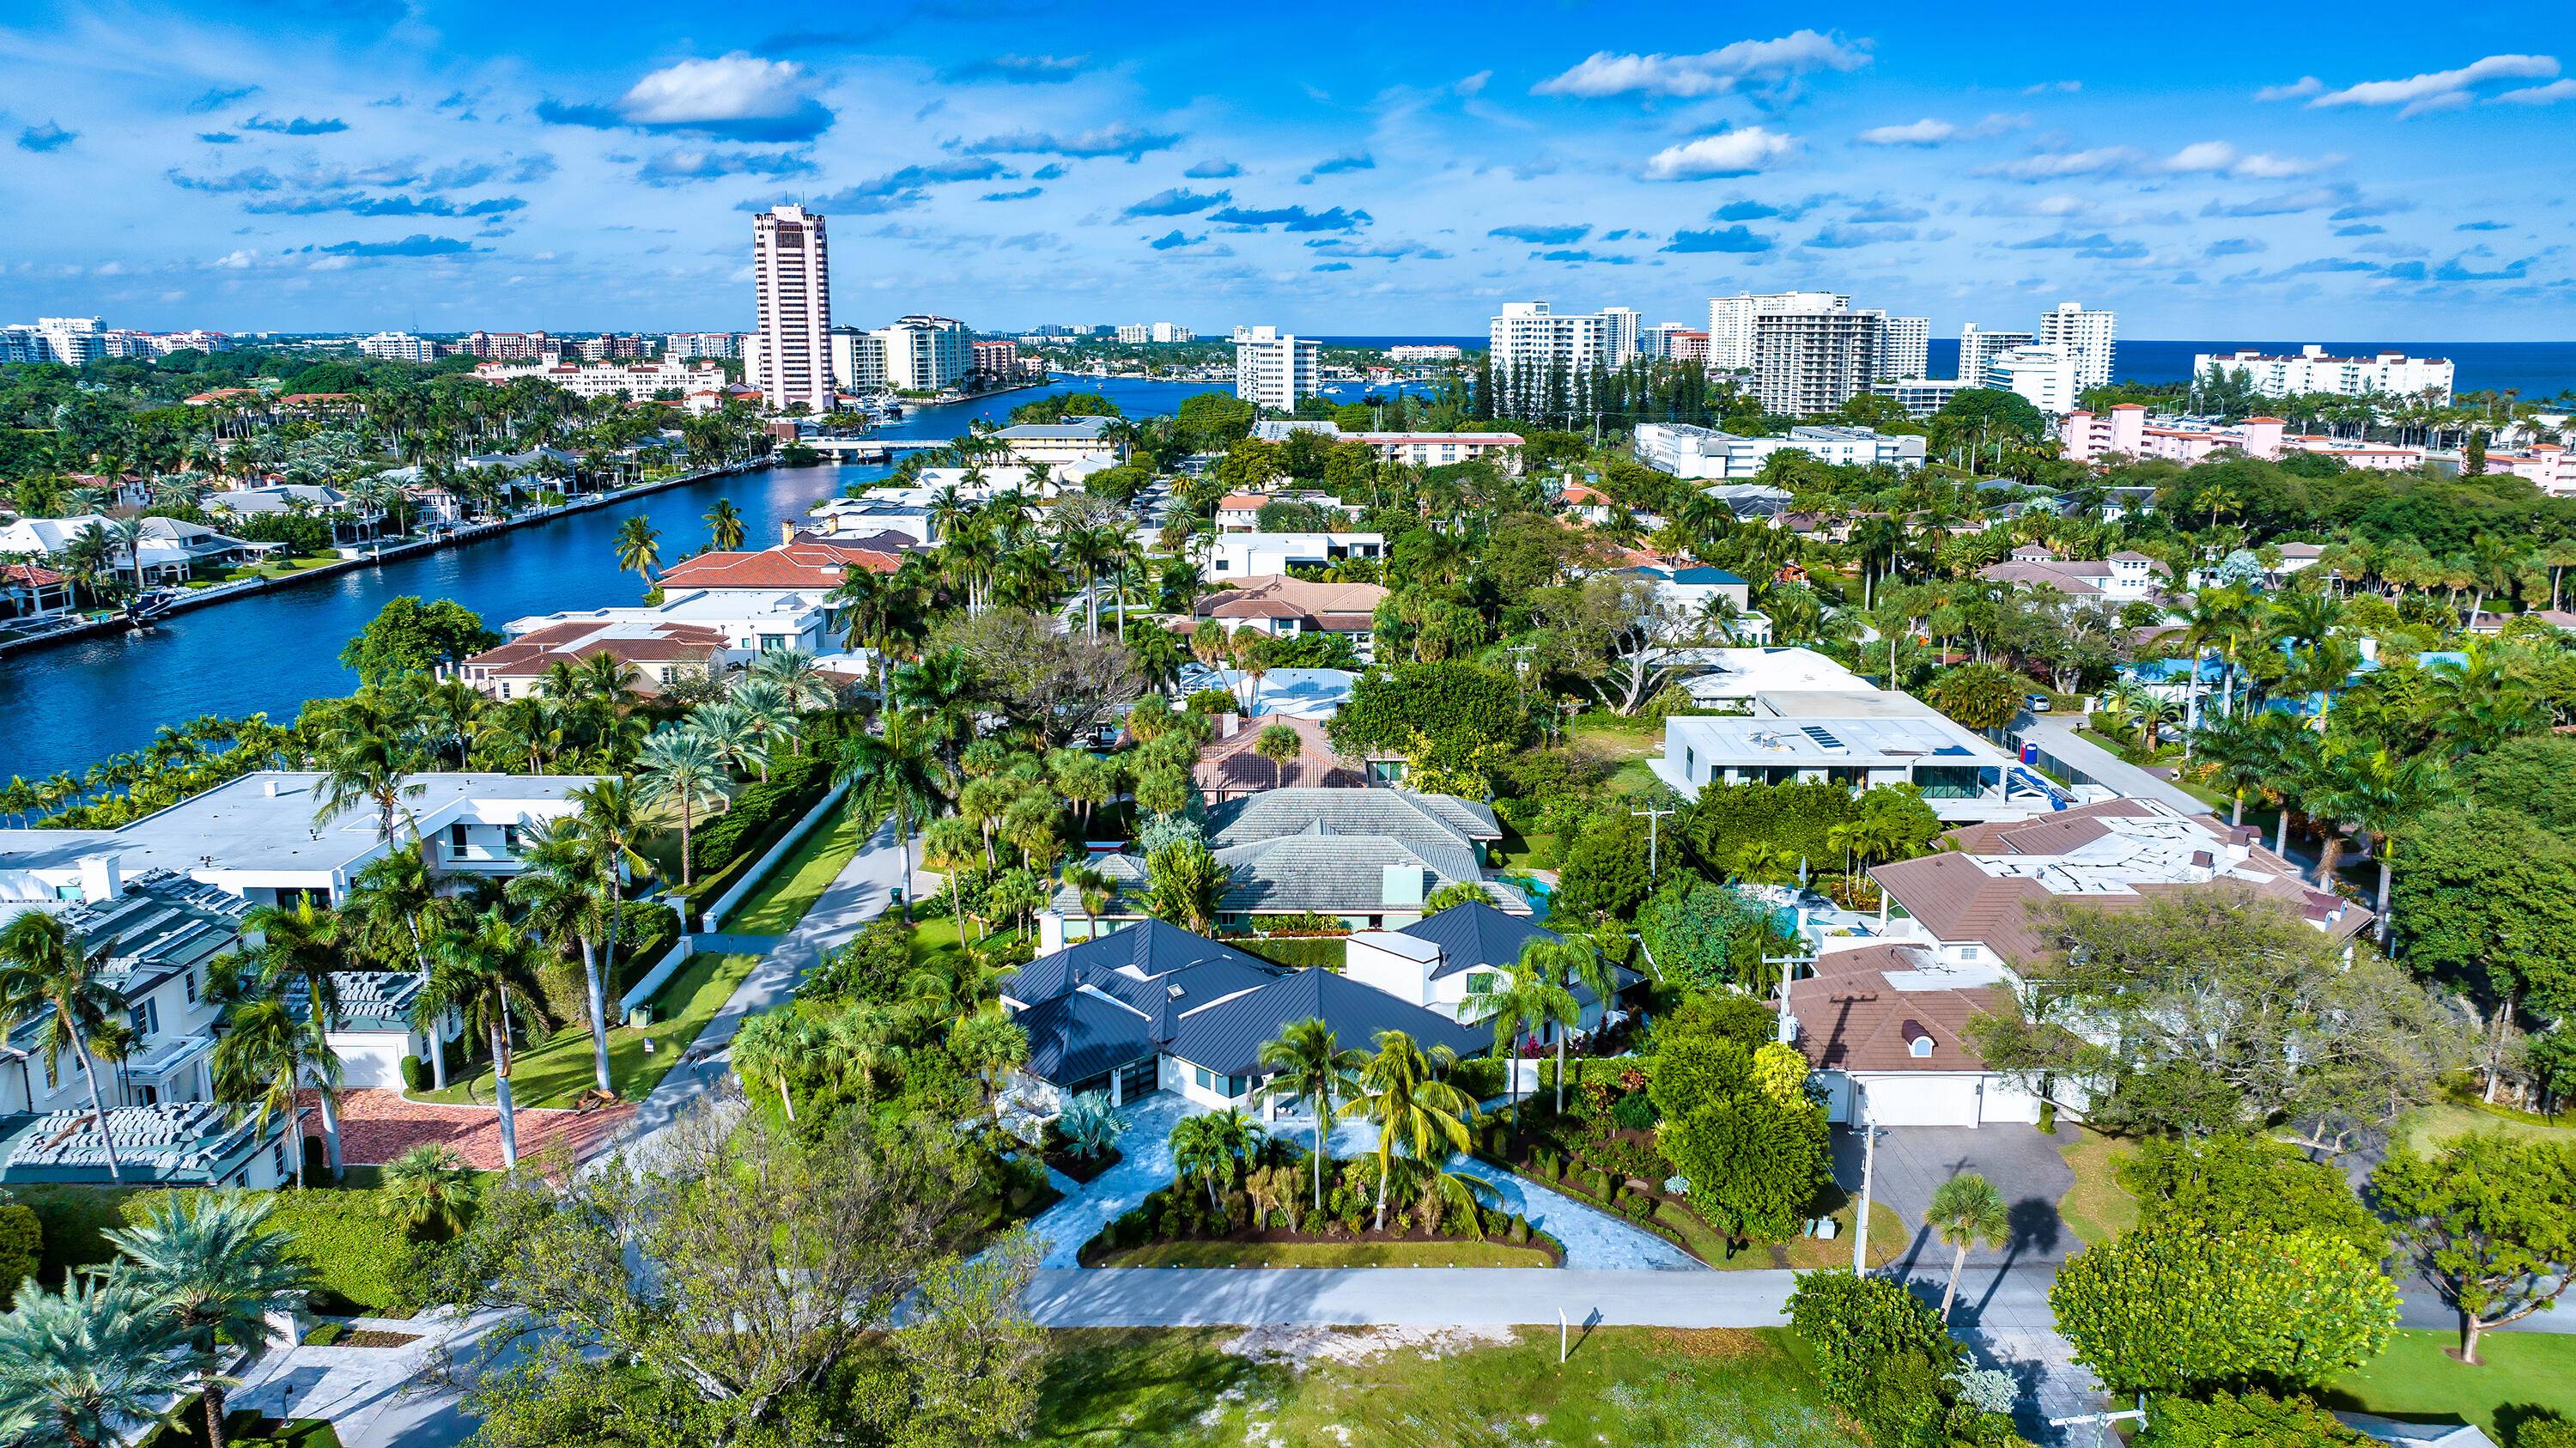 LOCATION 701 De Soto Road, Boca Raton, Florida In a prime beachside enclave by the world famous resort and club, The Boca Raton, this estate is just steps from the ...